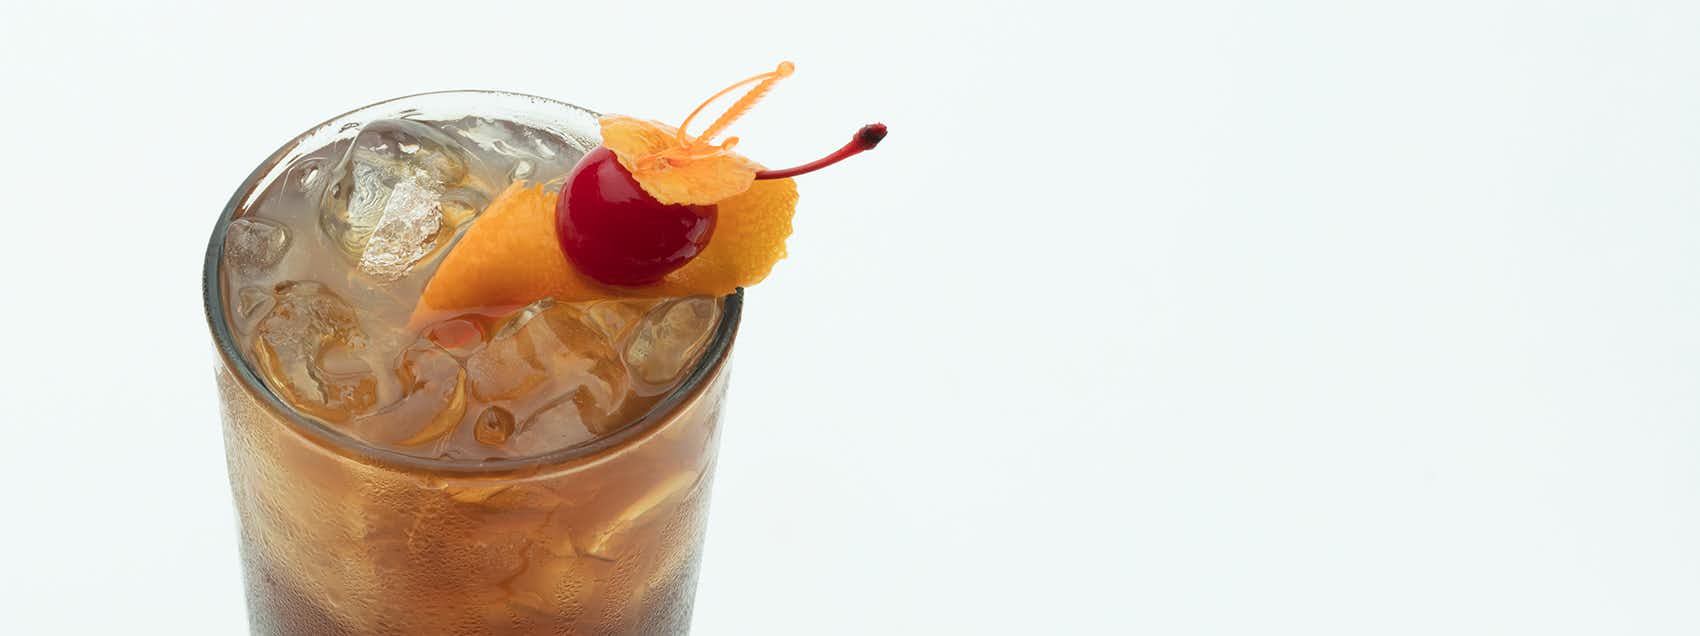 Where can you find a recipe for Long Island ice tea?